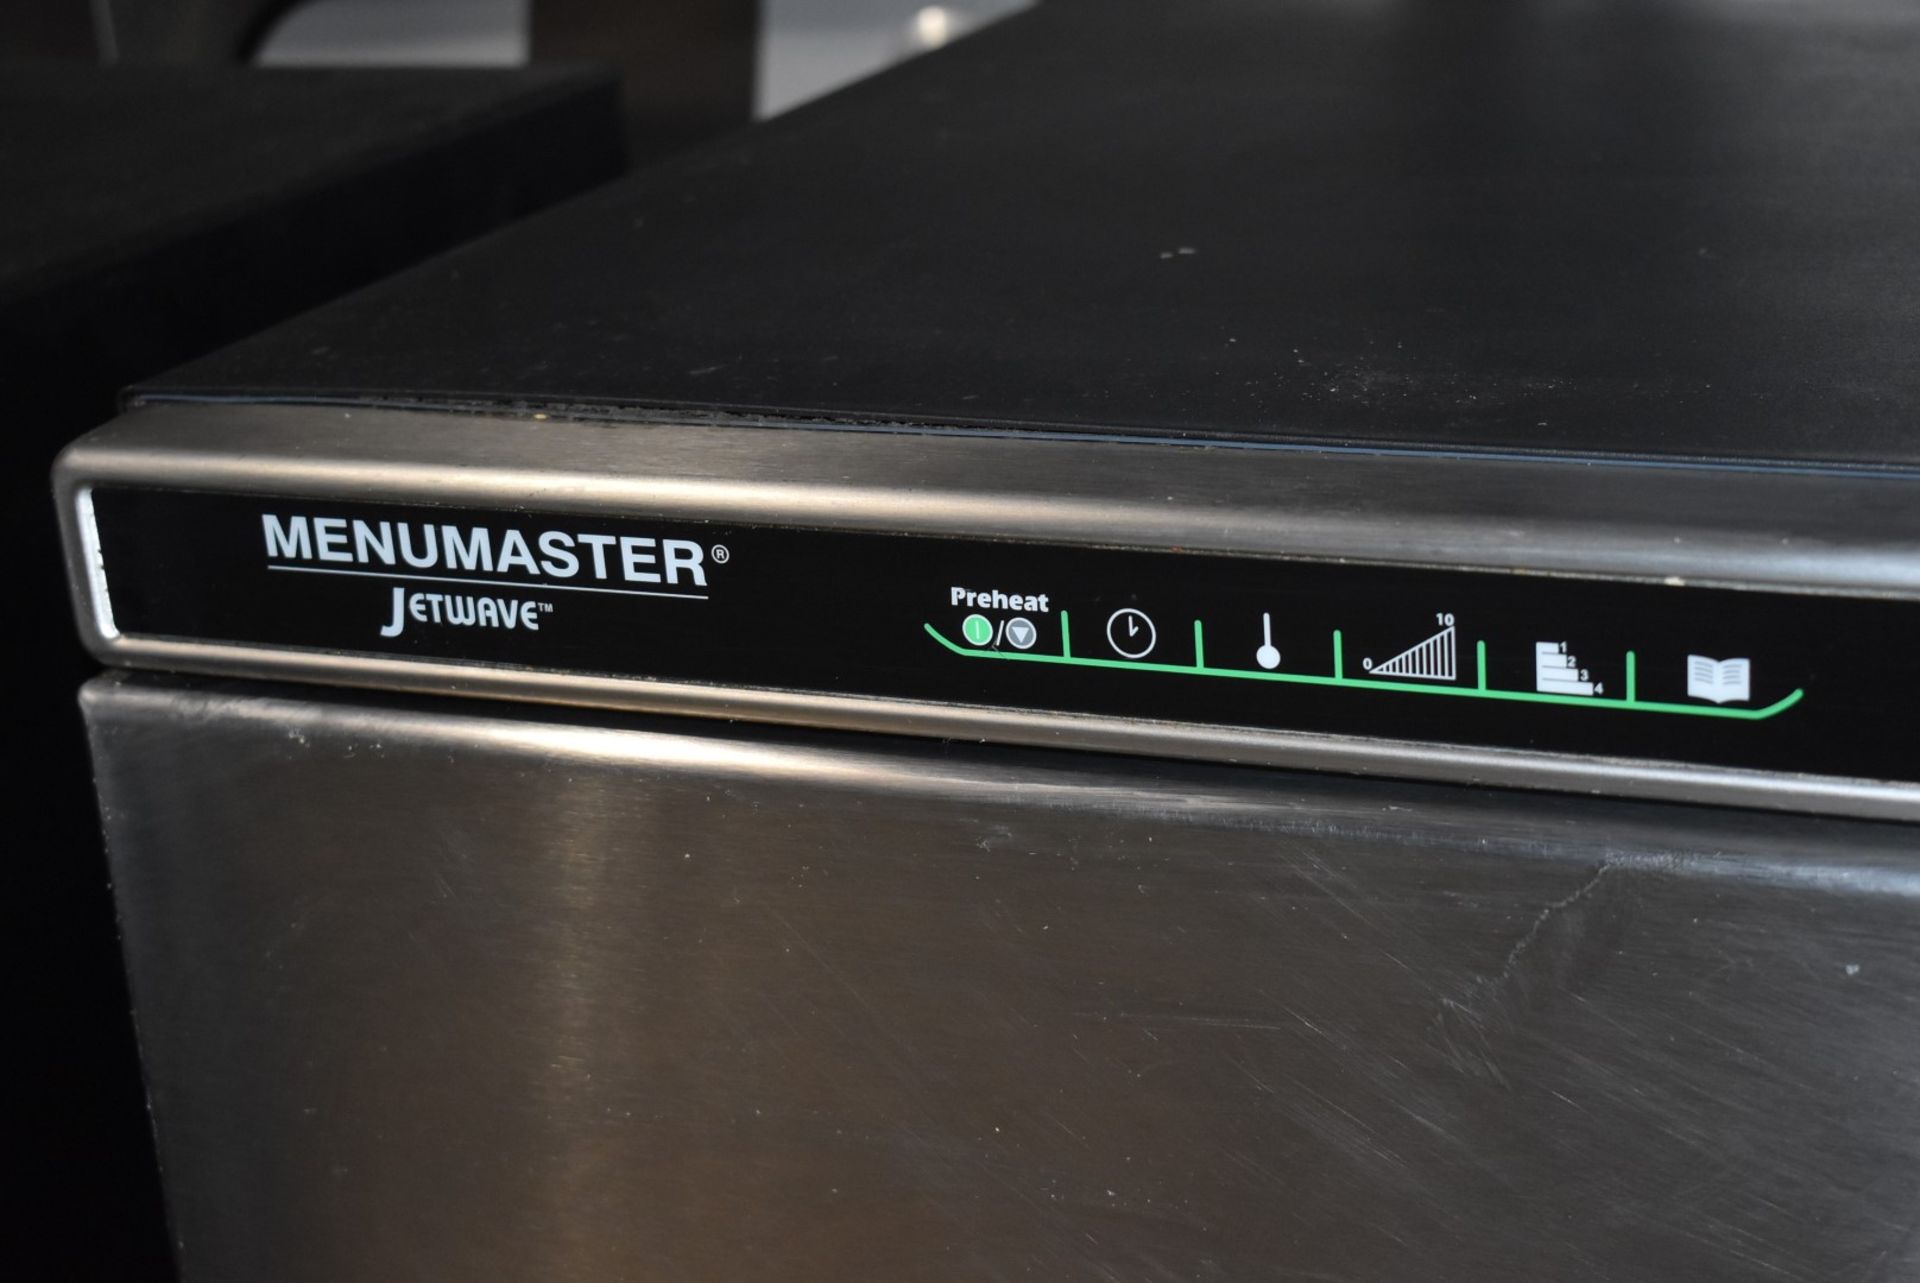 1 x Menumaster Jetwave JET514U High Speed Combination Microwave Oven - RRP £2,400 - Recently Removed - Image 4 of 11